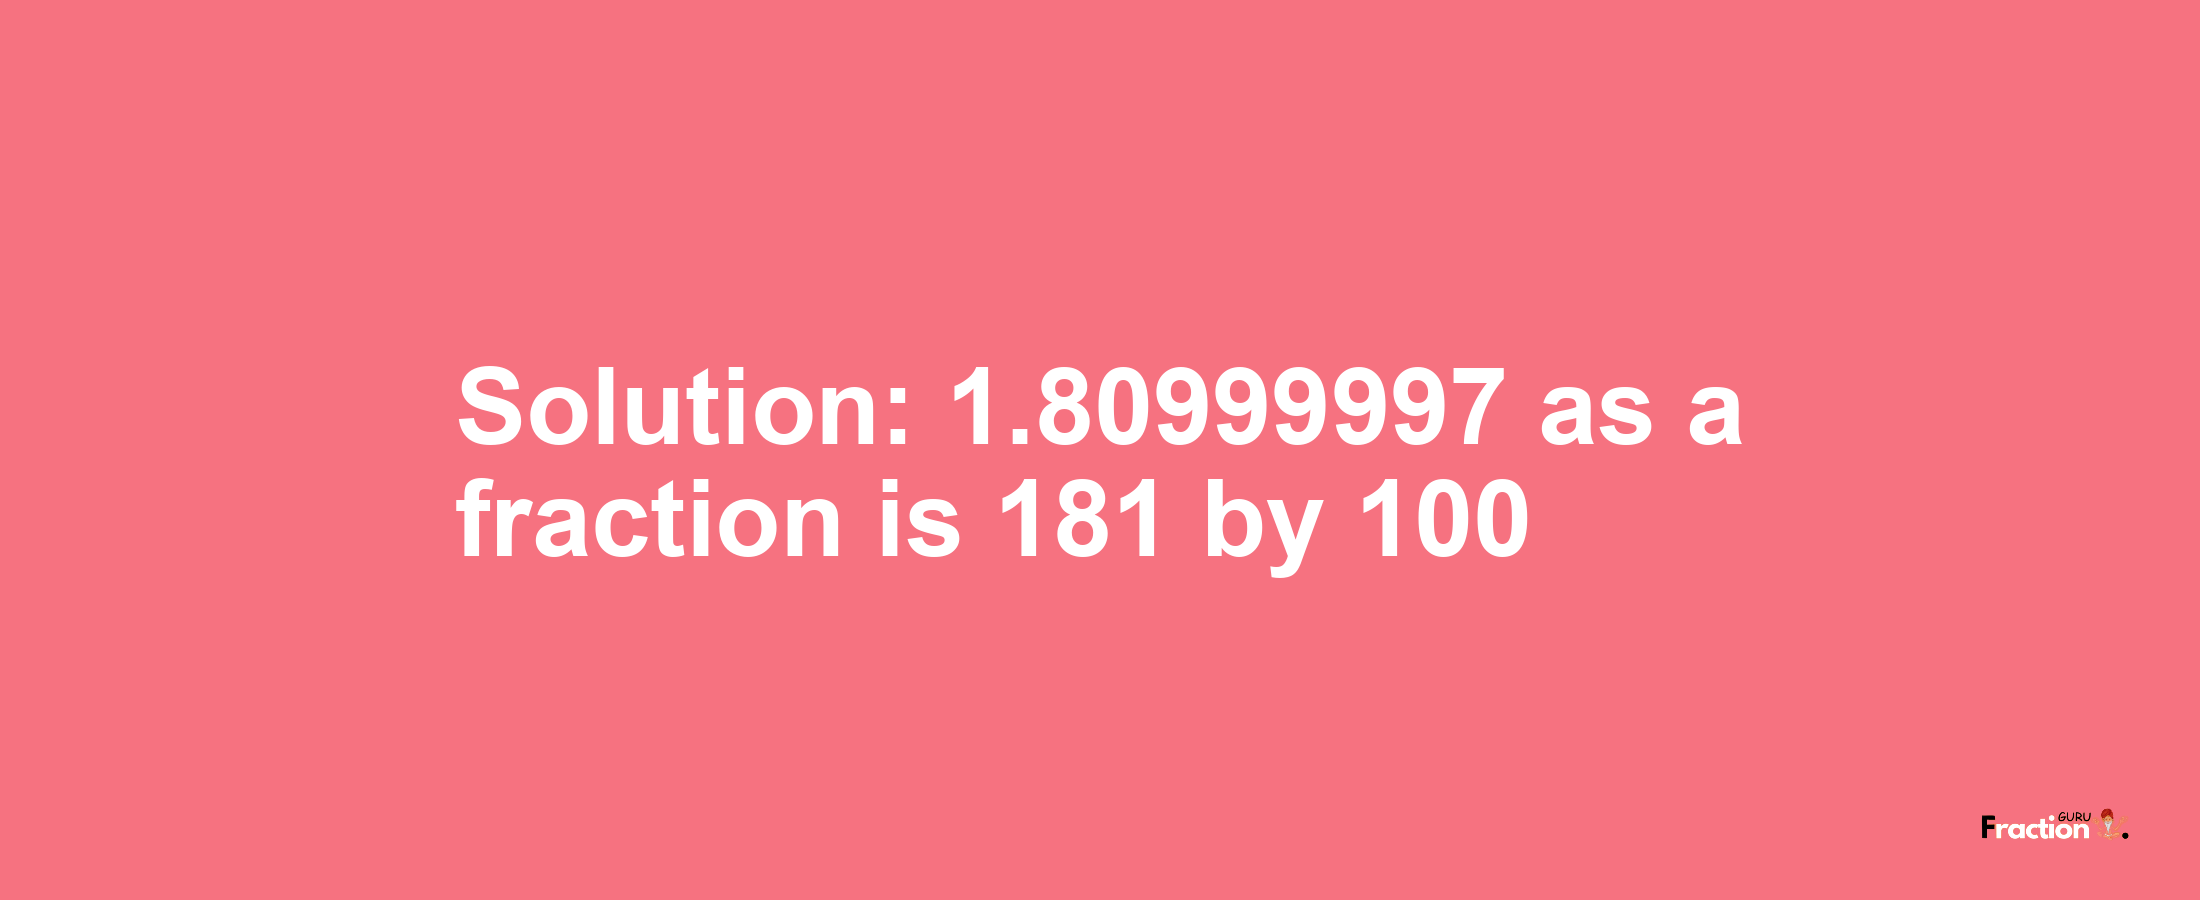 Solution:1.80999997 as a fraction is 181/100